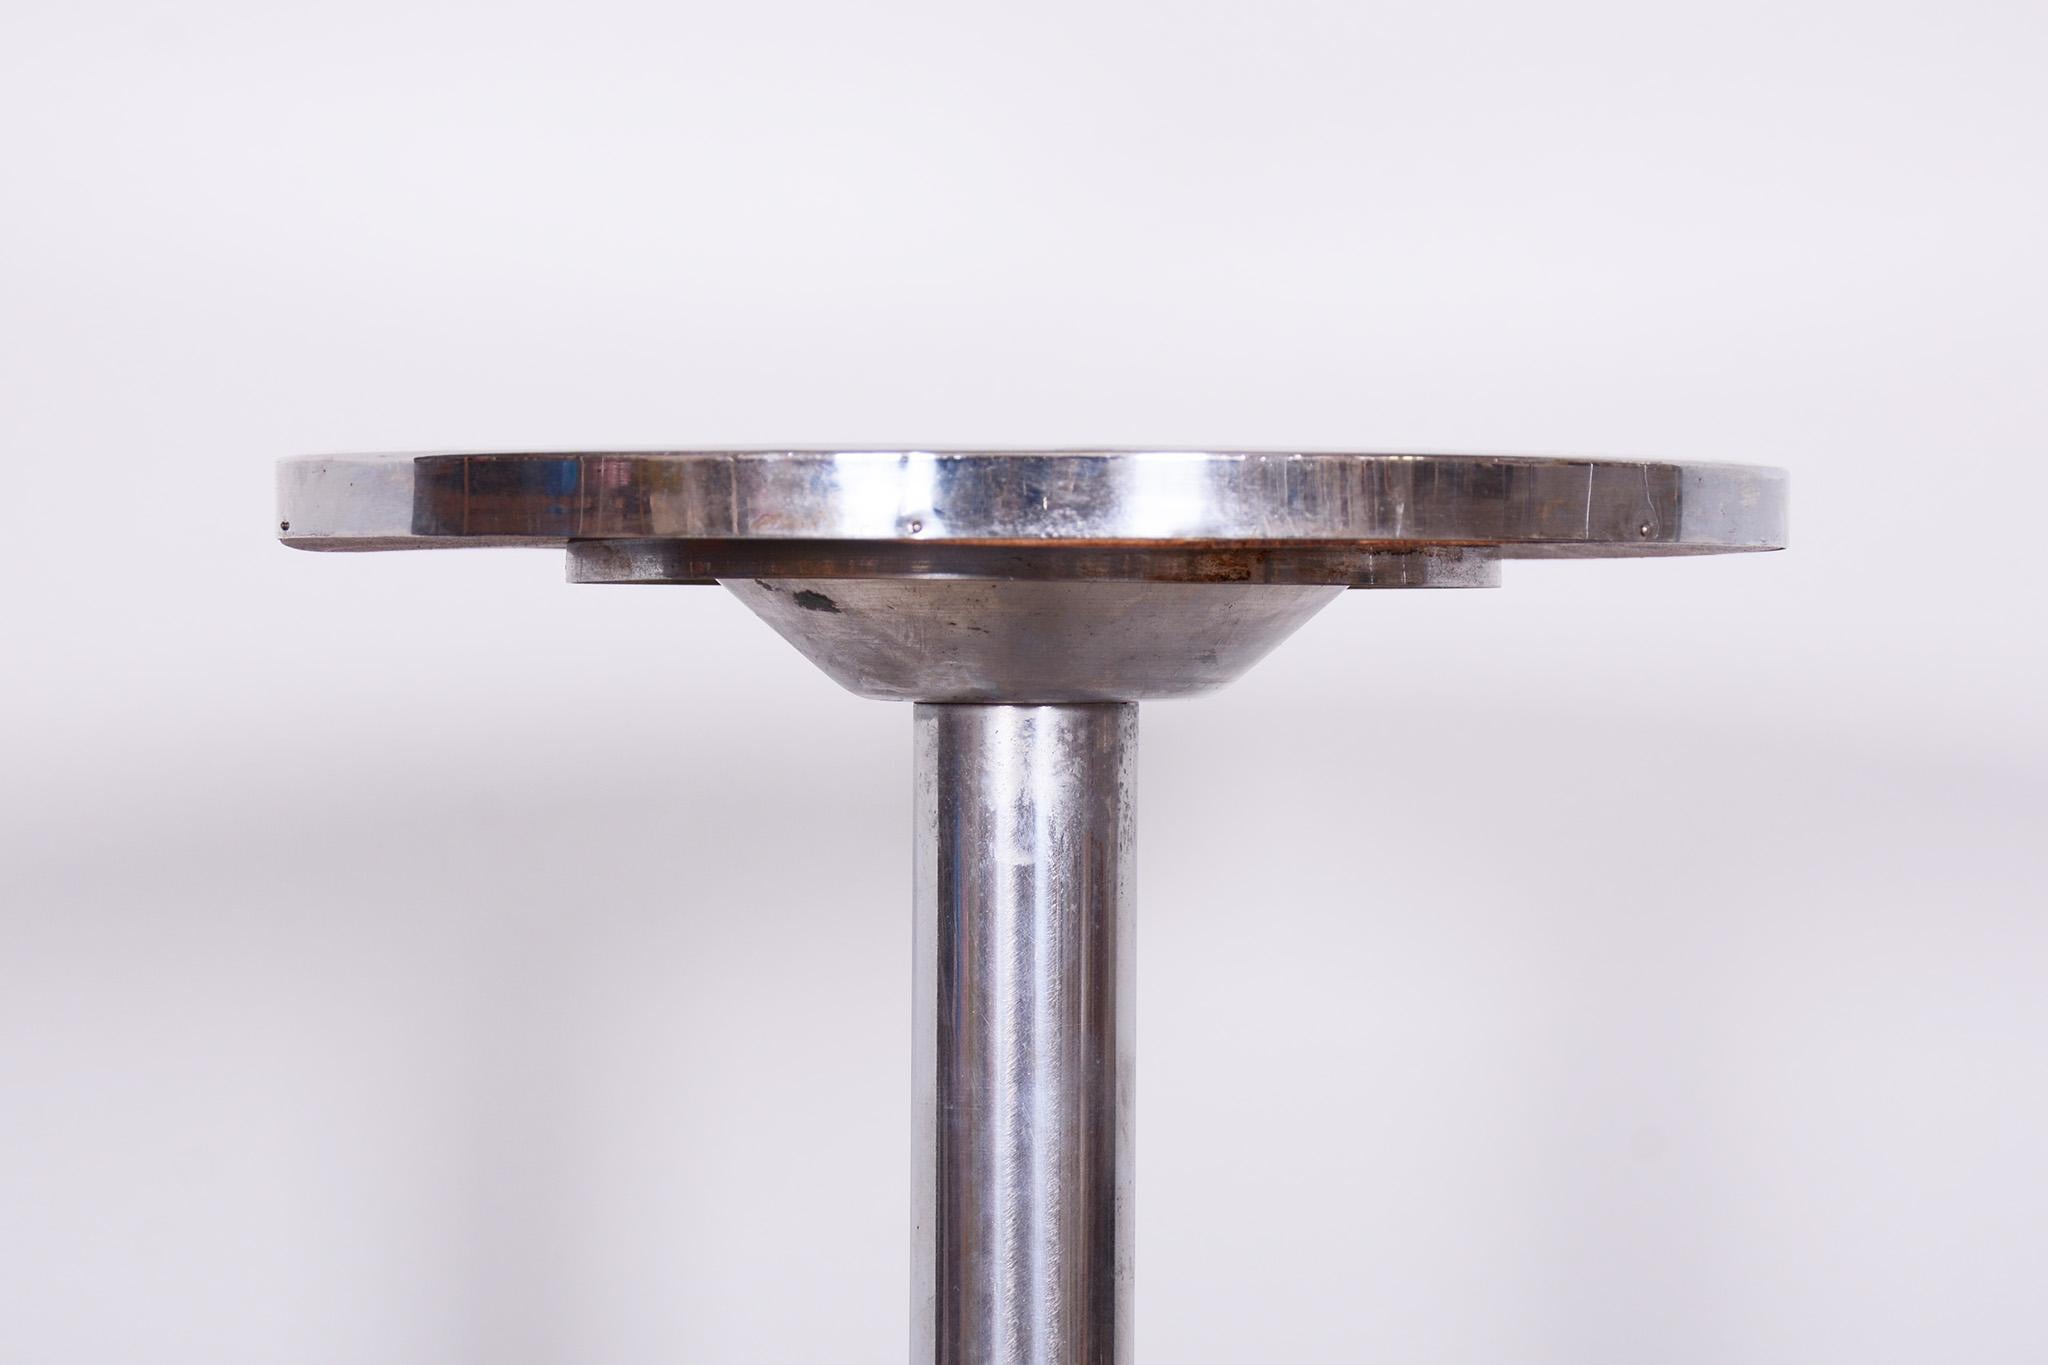 Bauhaus Style Small Table, Chrome-Plated Steel, Czechia, 1930s For Sale 1